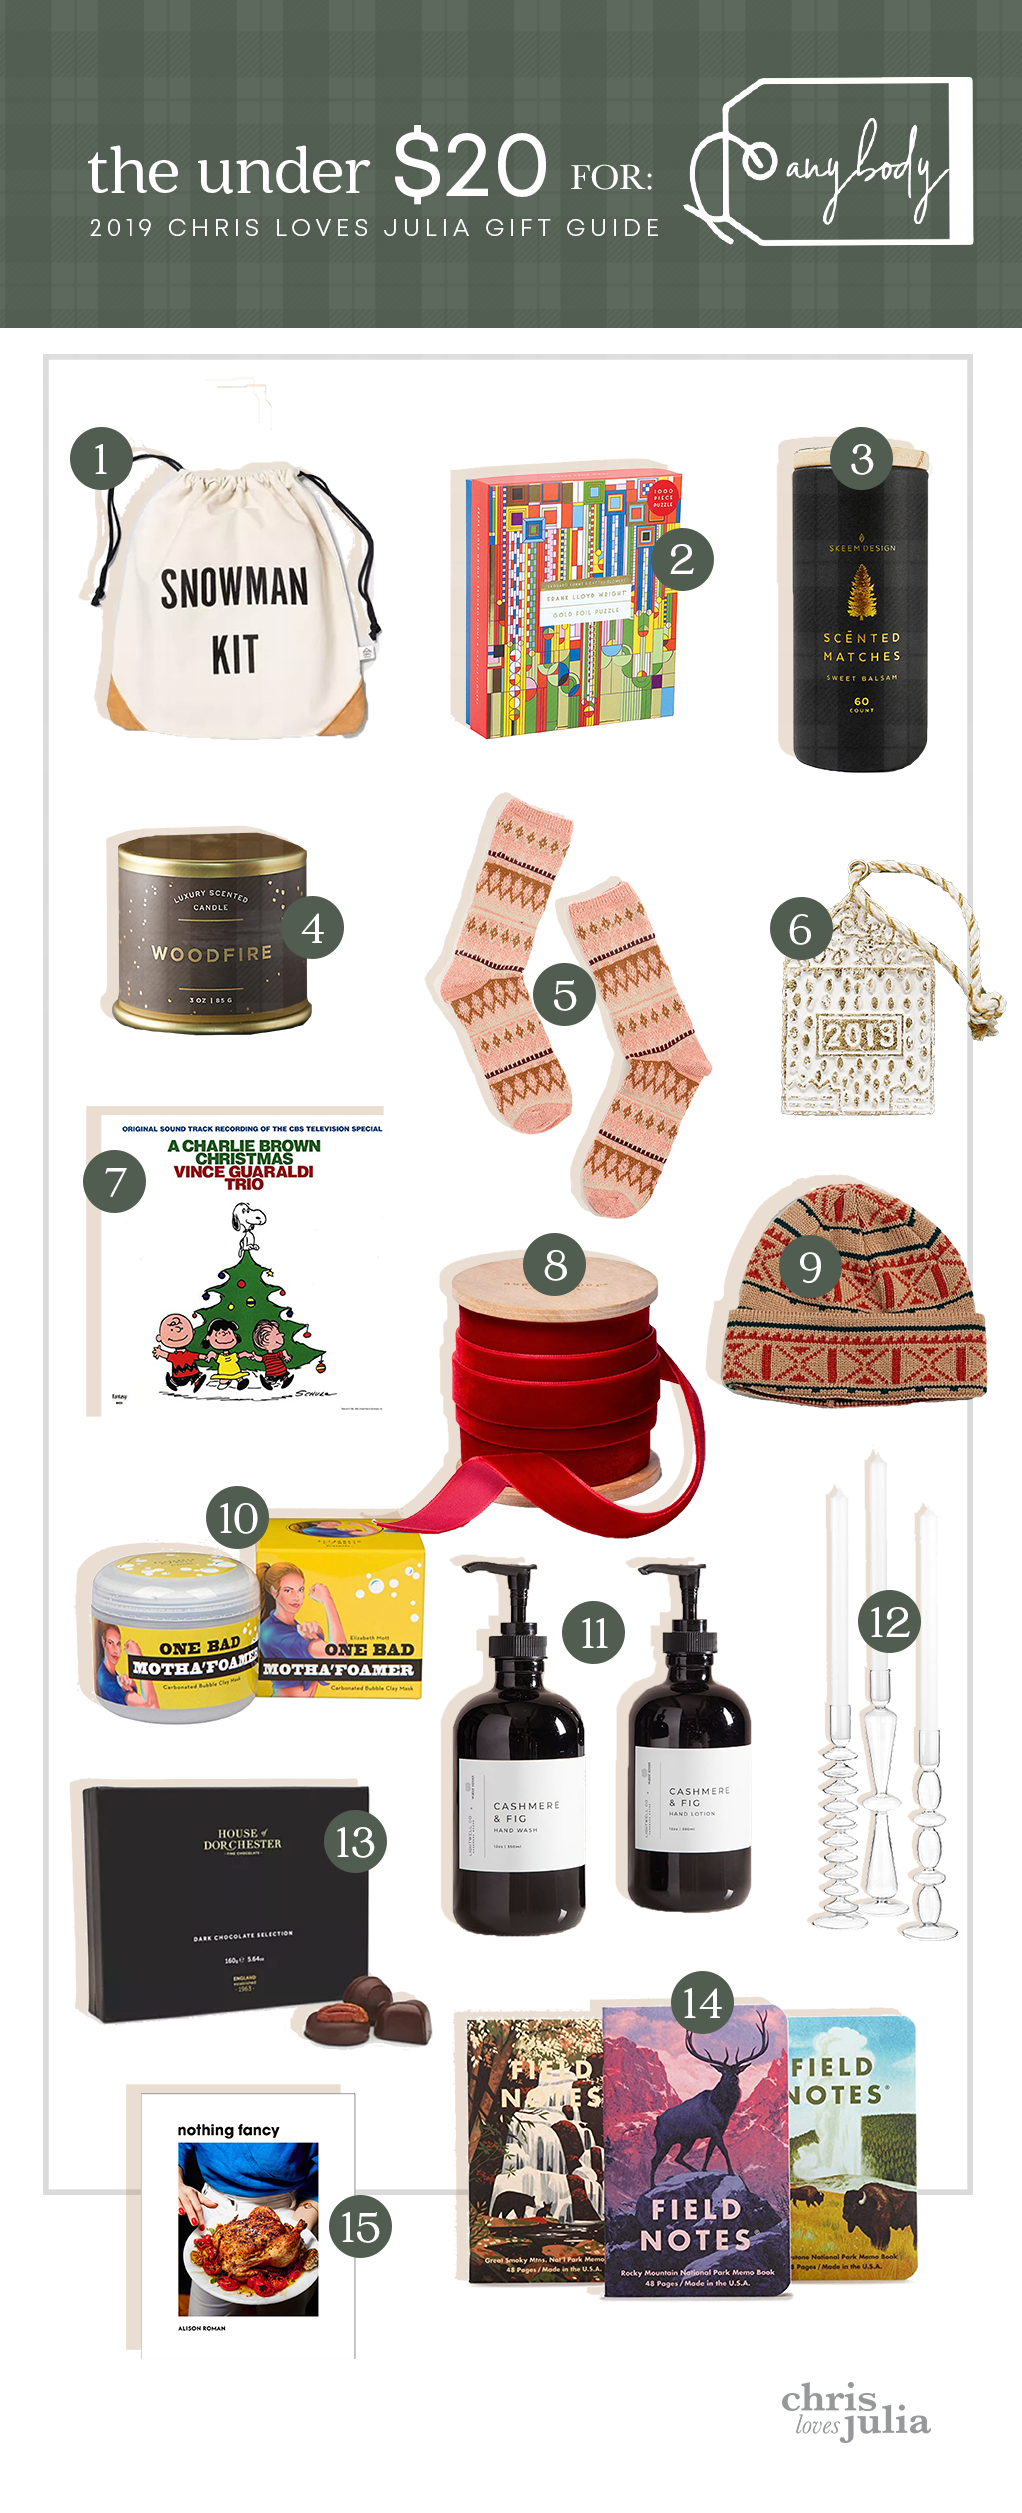 HOLIDAY GIFT GUIDE (Over 20 Unique Gift Ideas- All Under $30